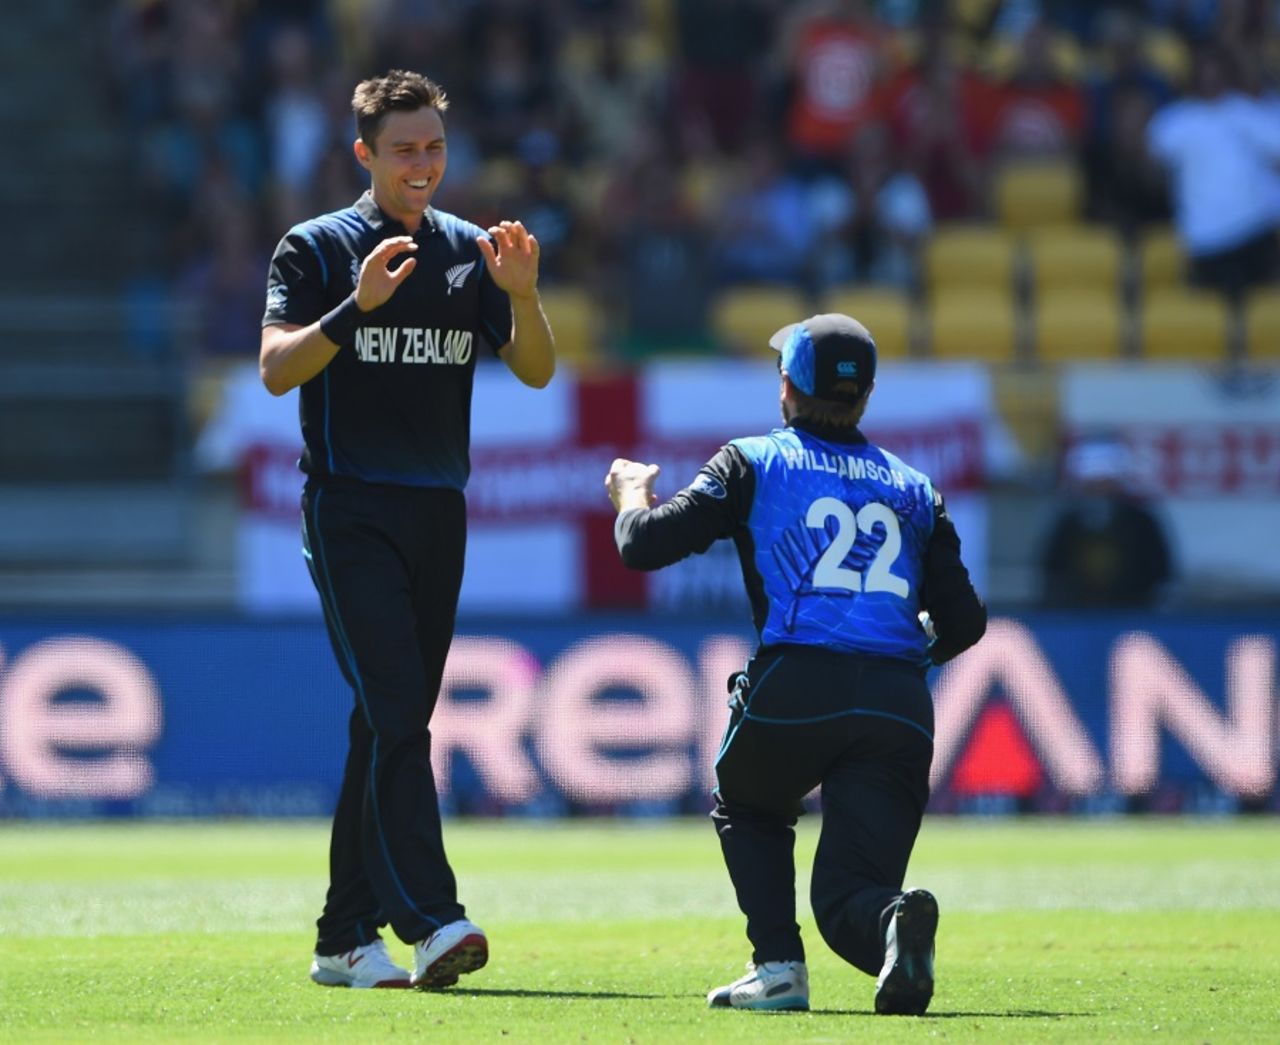 Trent Boult is delighted after dismissing Gary Ballance for 10, New Zealand v England, World Cup 2015, Group A, Wellington, February 20, 2015